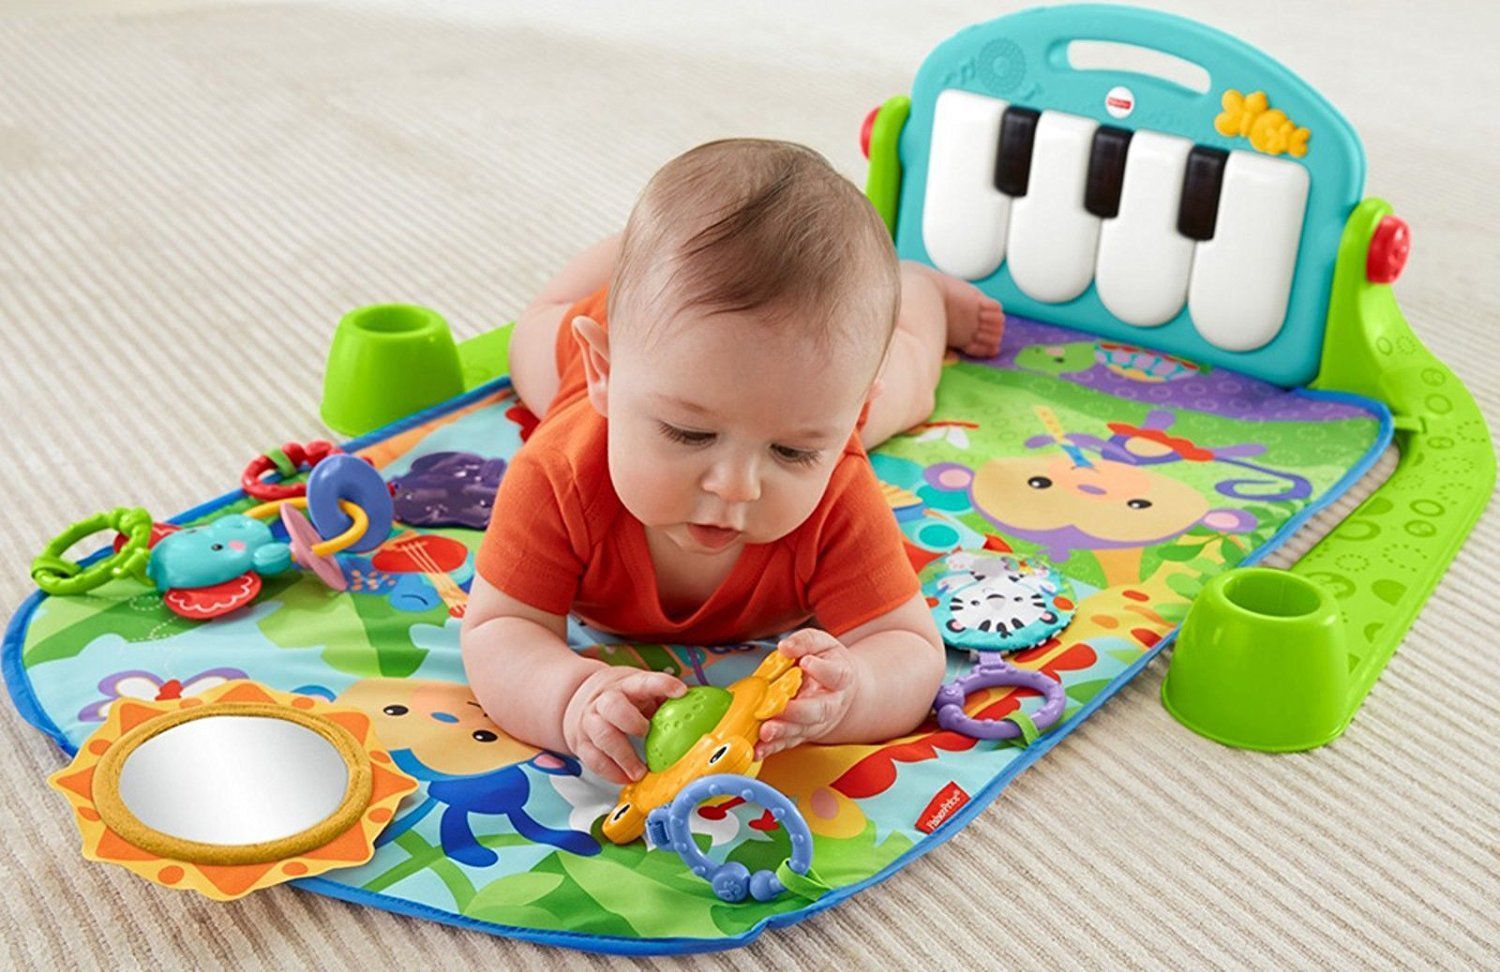 The 32 Best Baby Gifts of 2021